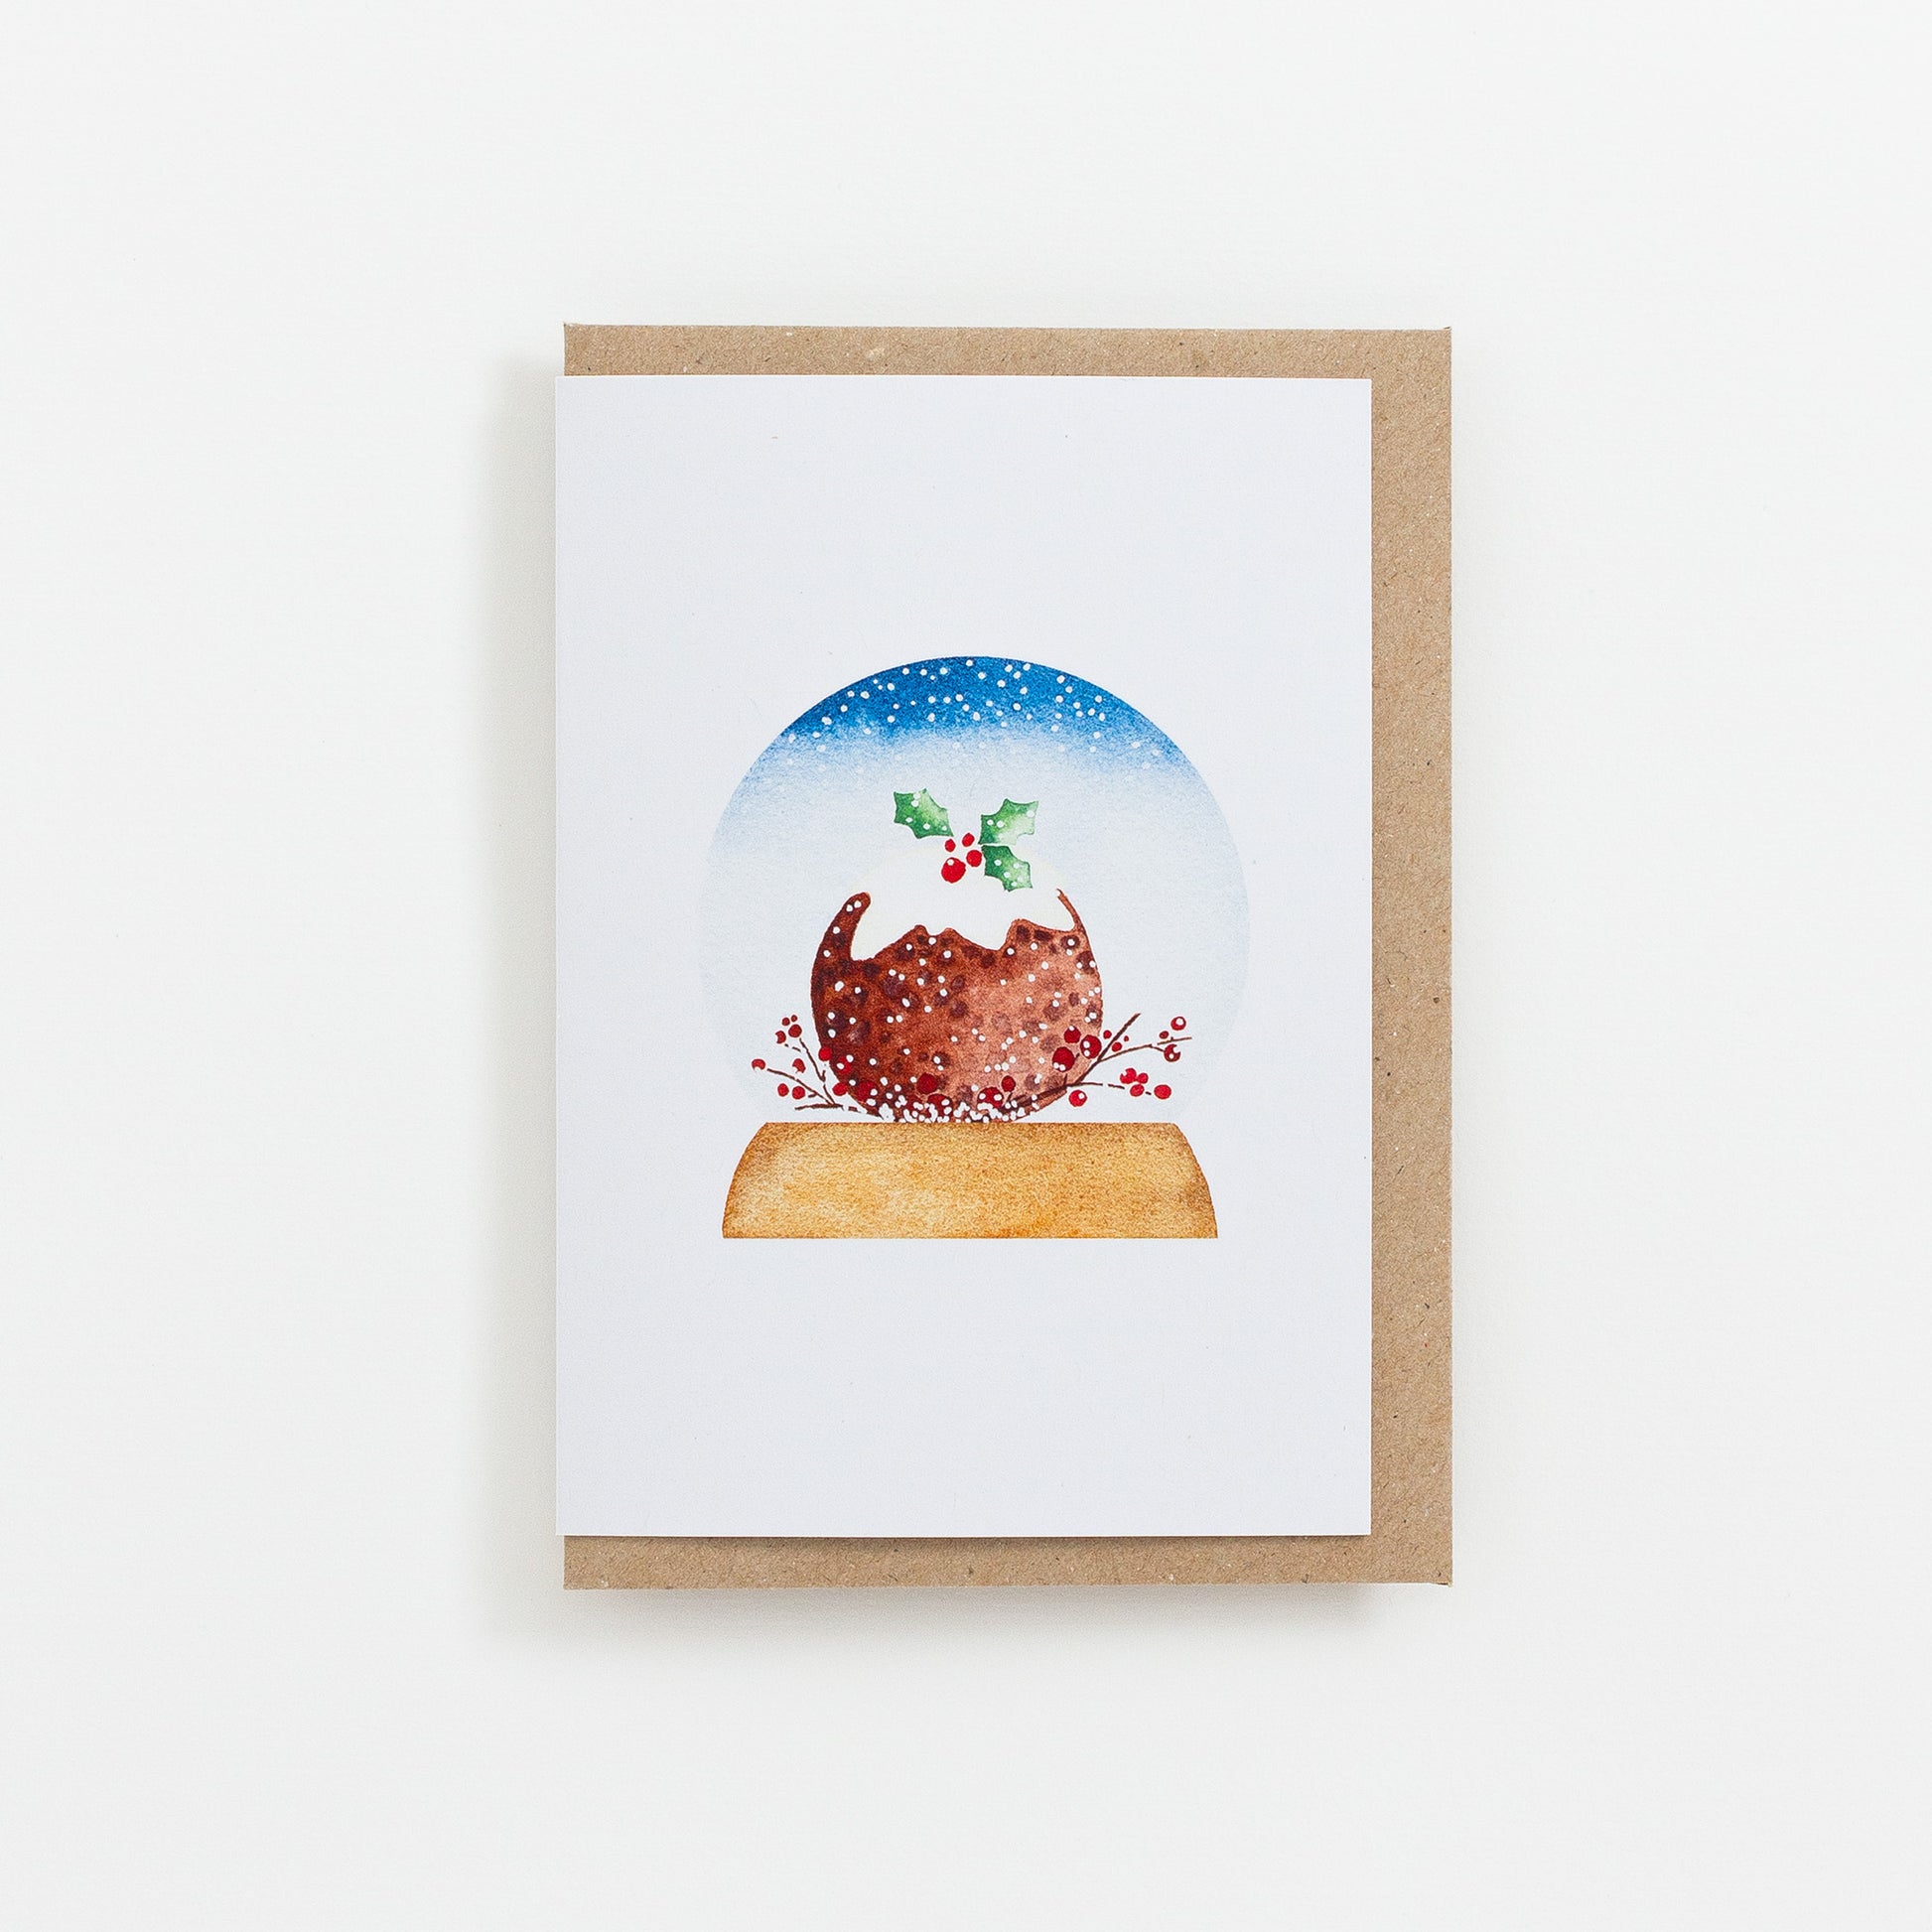 A festive food Snow Globe card designed from handmade watercolour painting. The illustration is a round Christmas pudding topped with icing and holly.